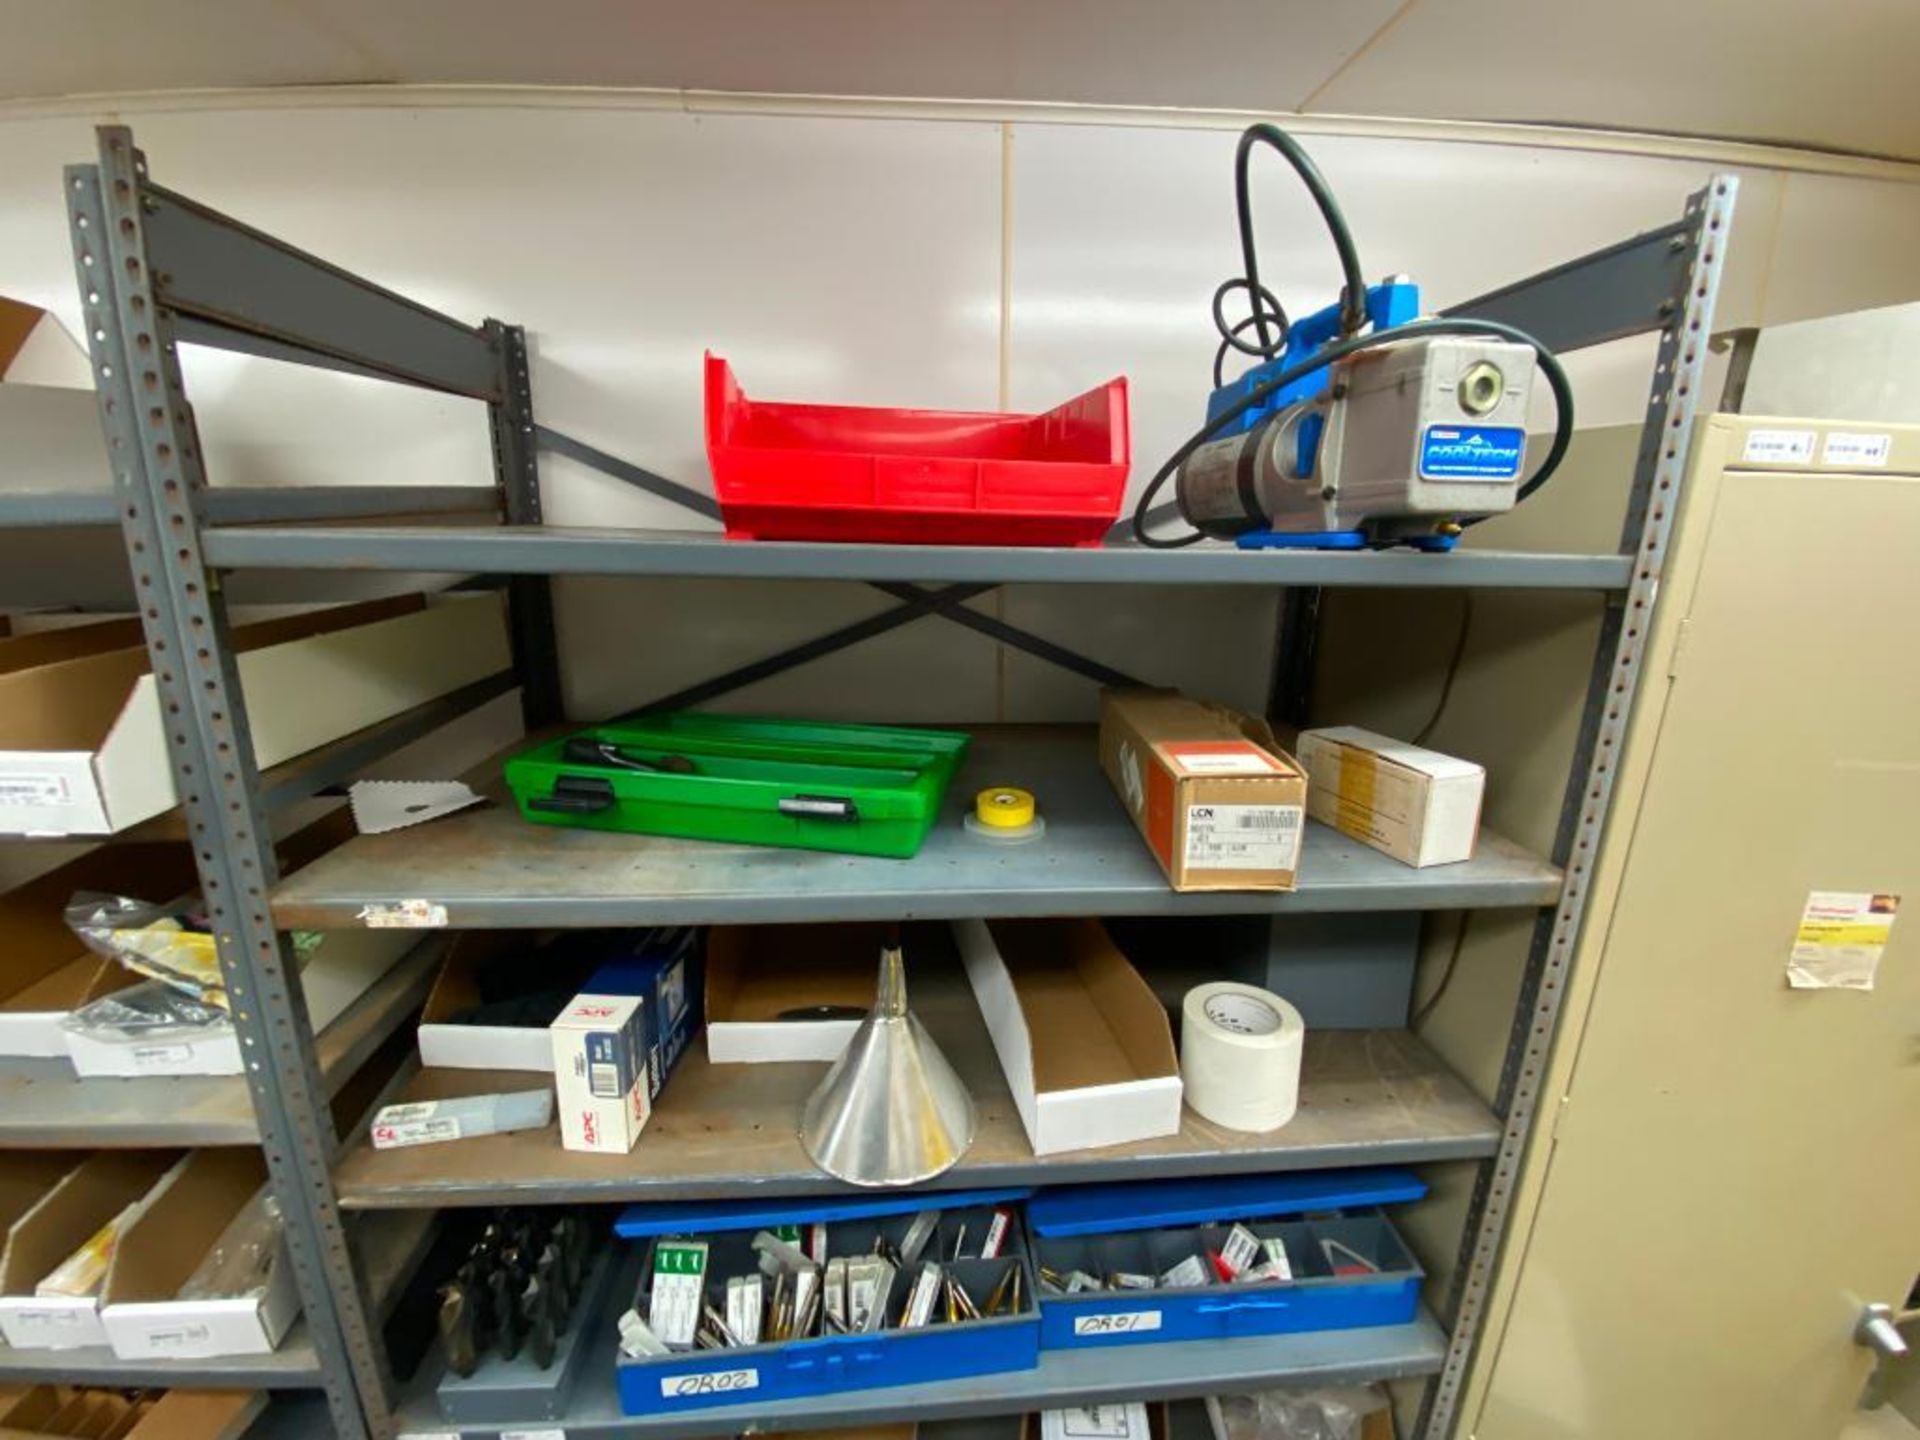 contents of supply room, JustRite flammable storage cabinets, SPX pump, assorted bits, Cryospray, in - Image 6 of 31